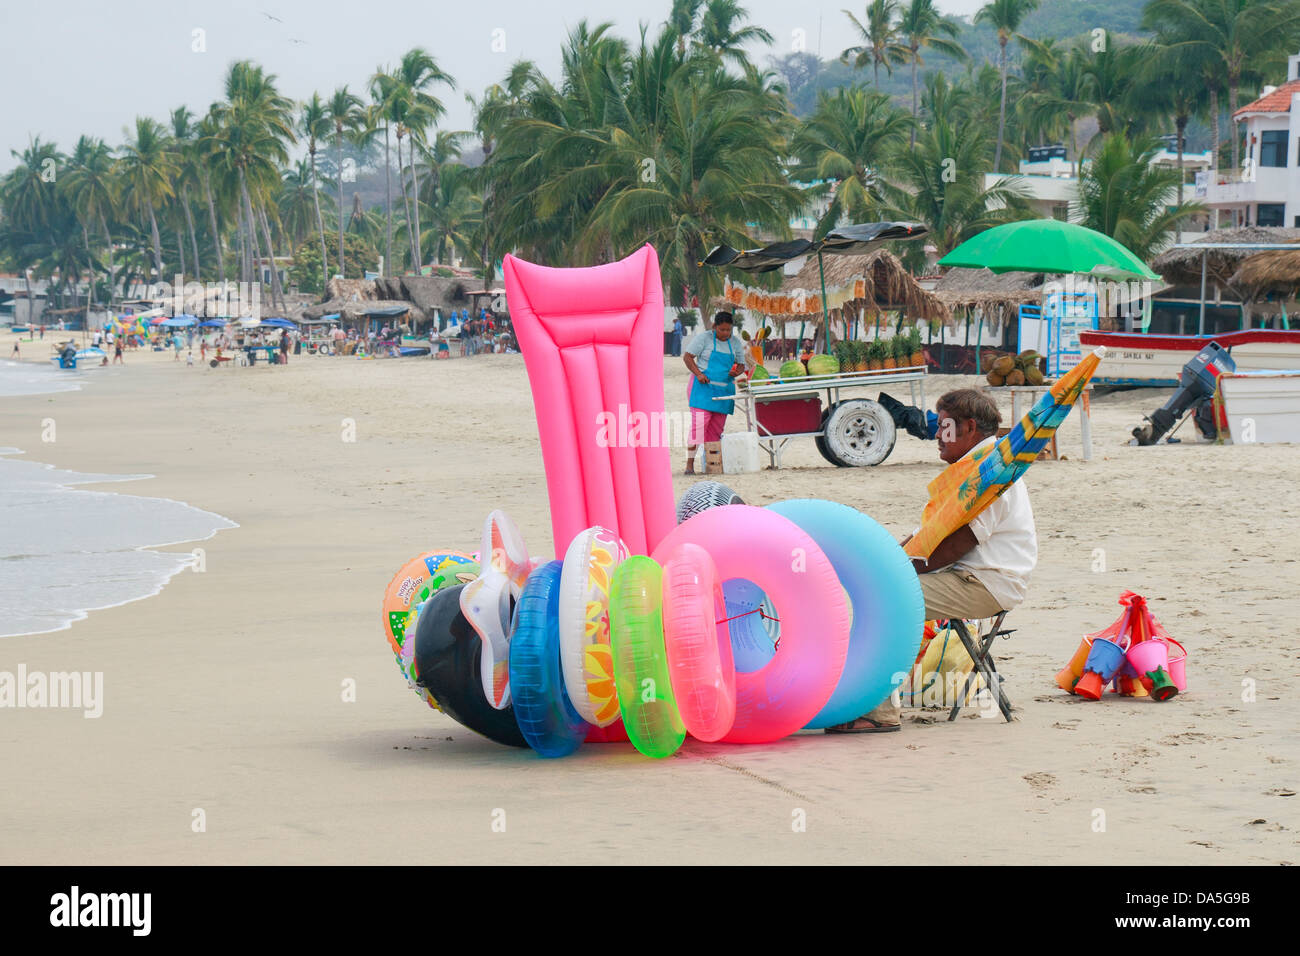 Beach selling inflatable toys on Los Ayala beach, Stock Photo - Alamy